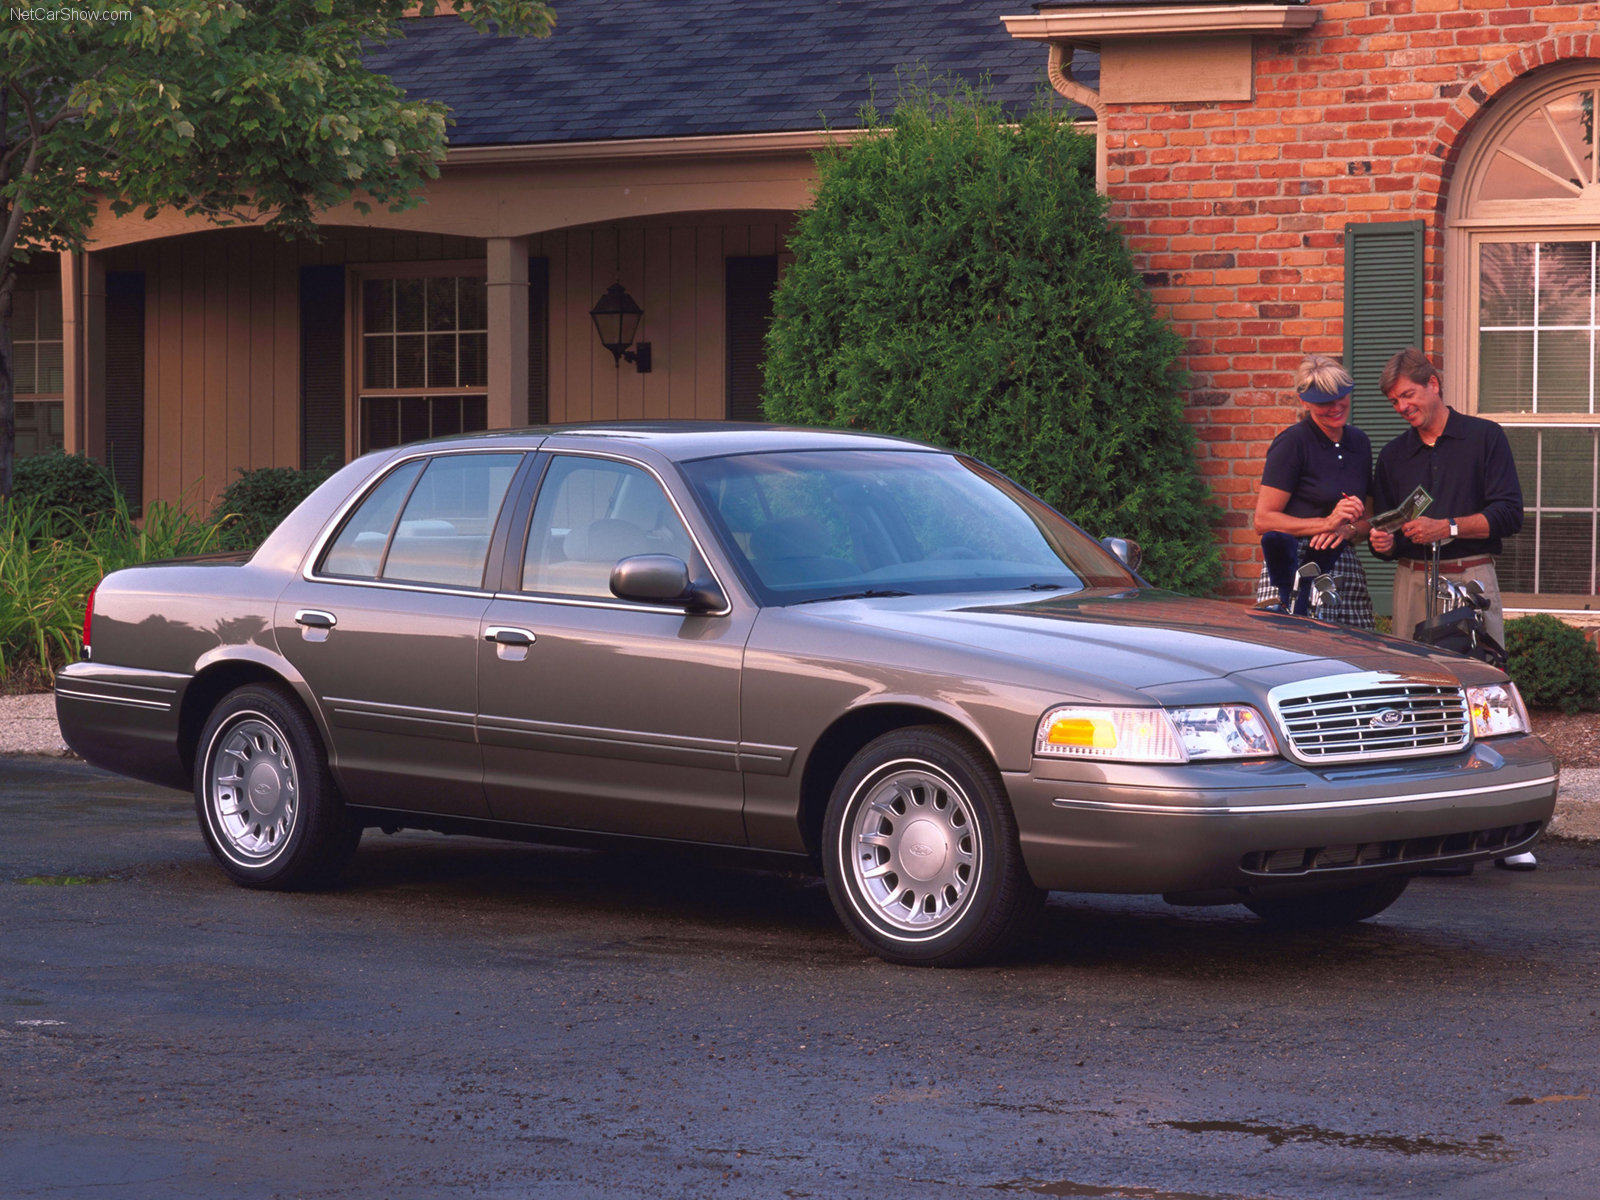 Ford Crown Victoria photos - PhotoGallery with 26 pics| CarsBase.com